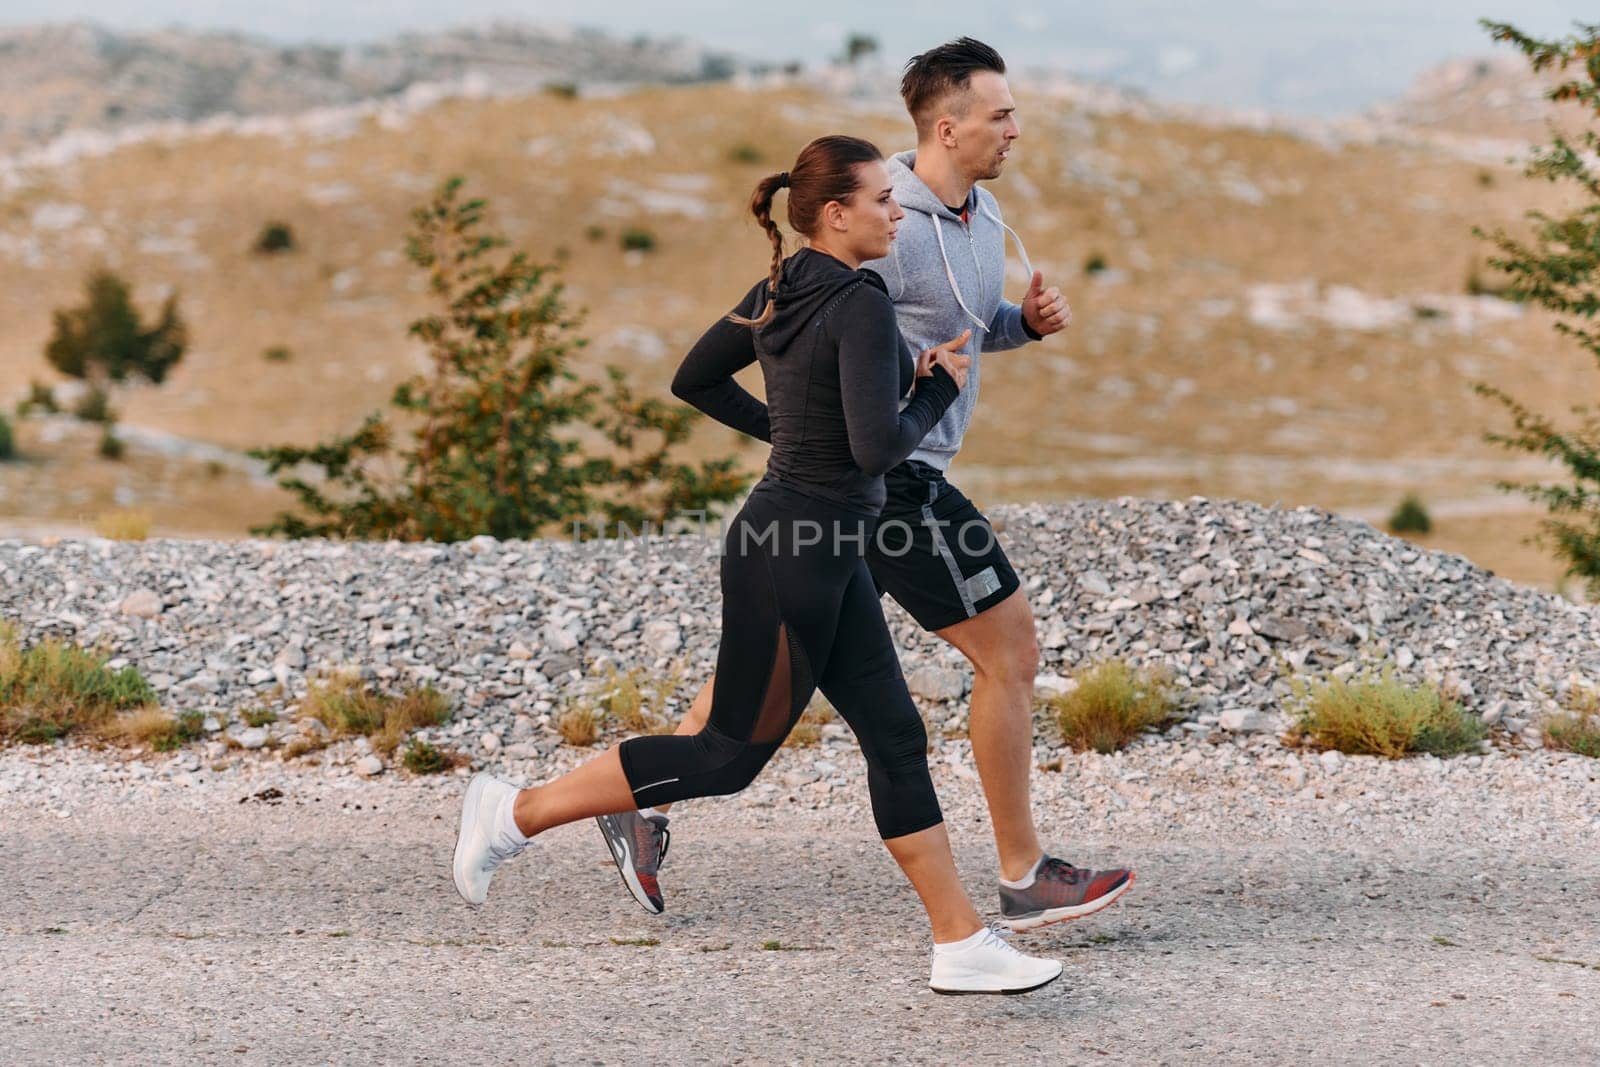 A Couple's Energizing Morning Run in the Mountains by dotshock